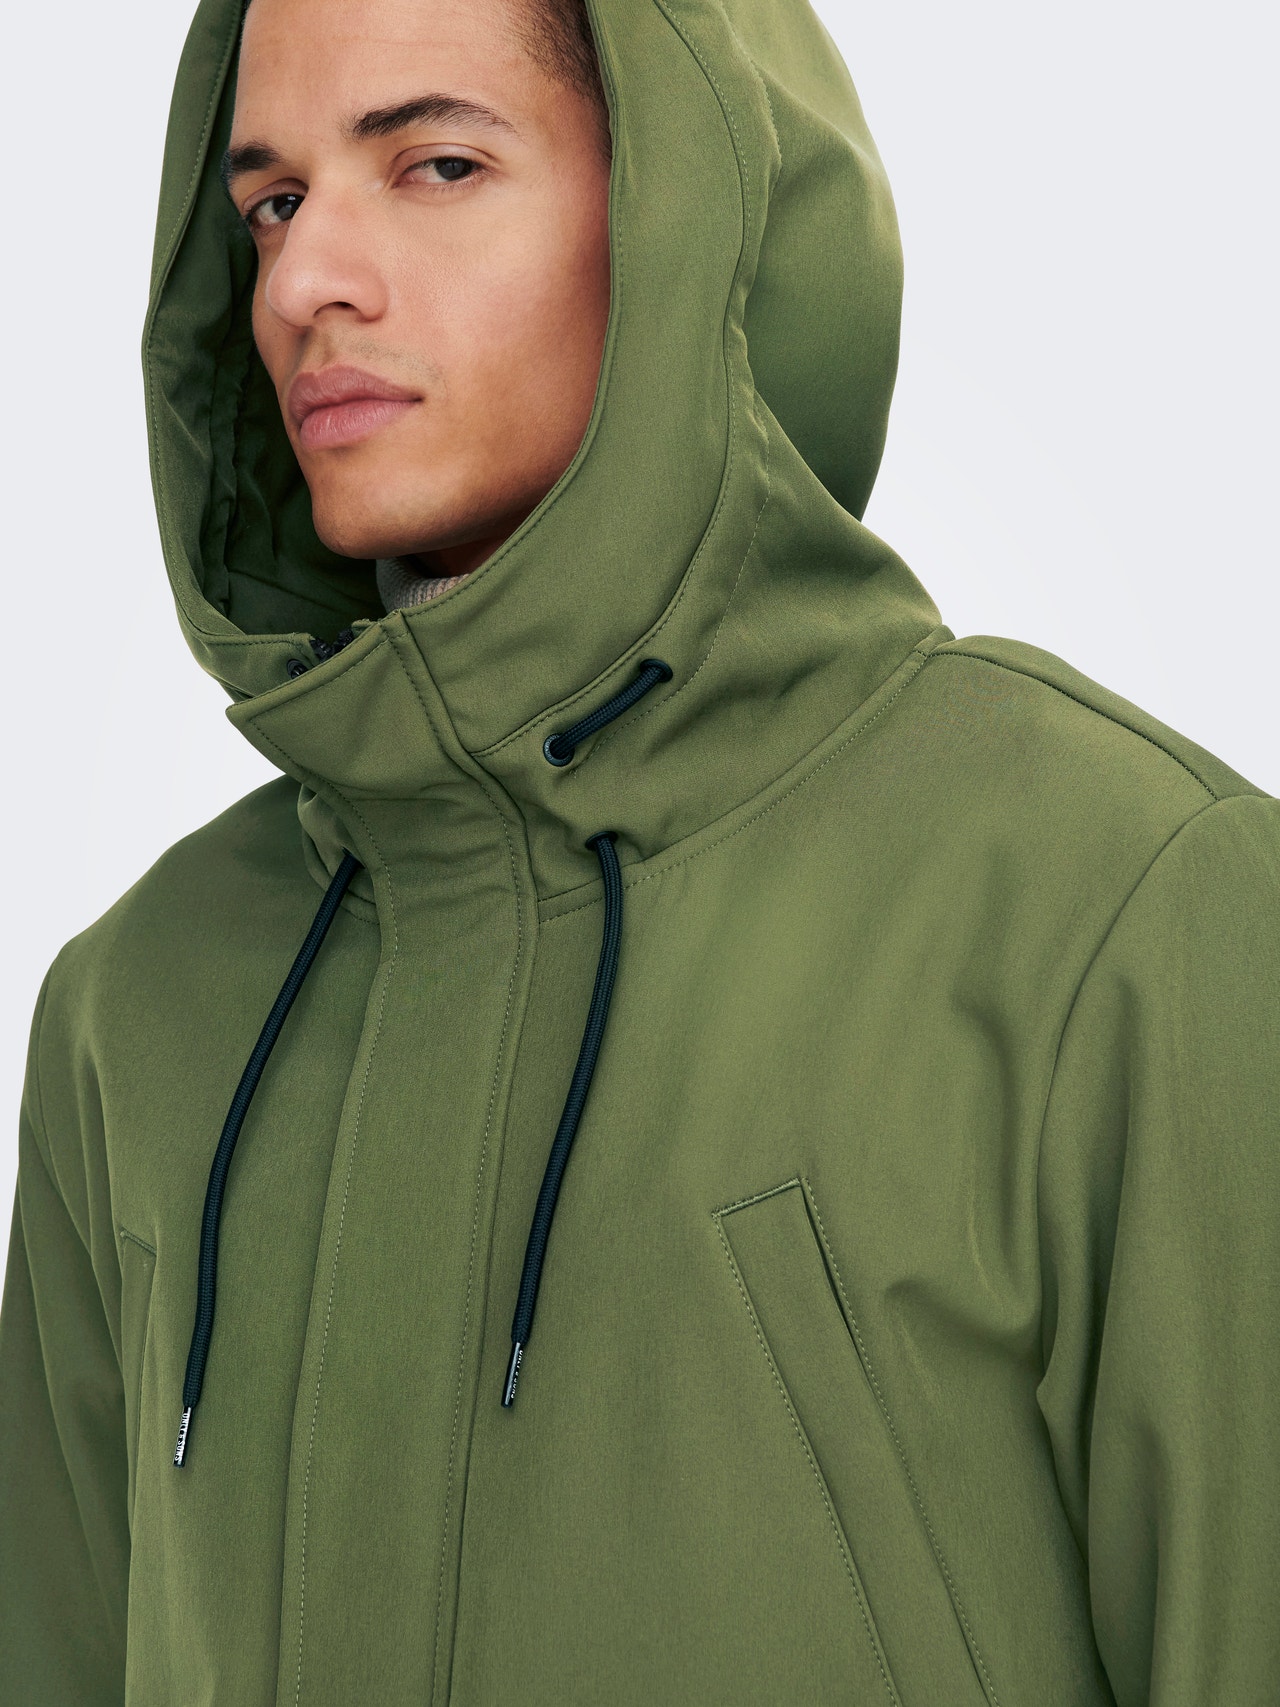 SOS SPORTSWEAR OF Sweden Mens Olive Green Hooded Jacket UK Size Small  £34.99 - PicClick UK